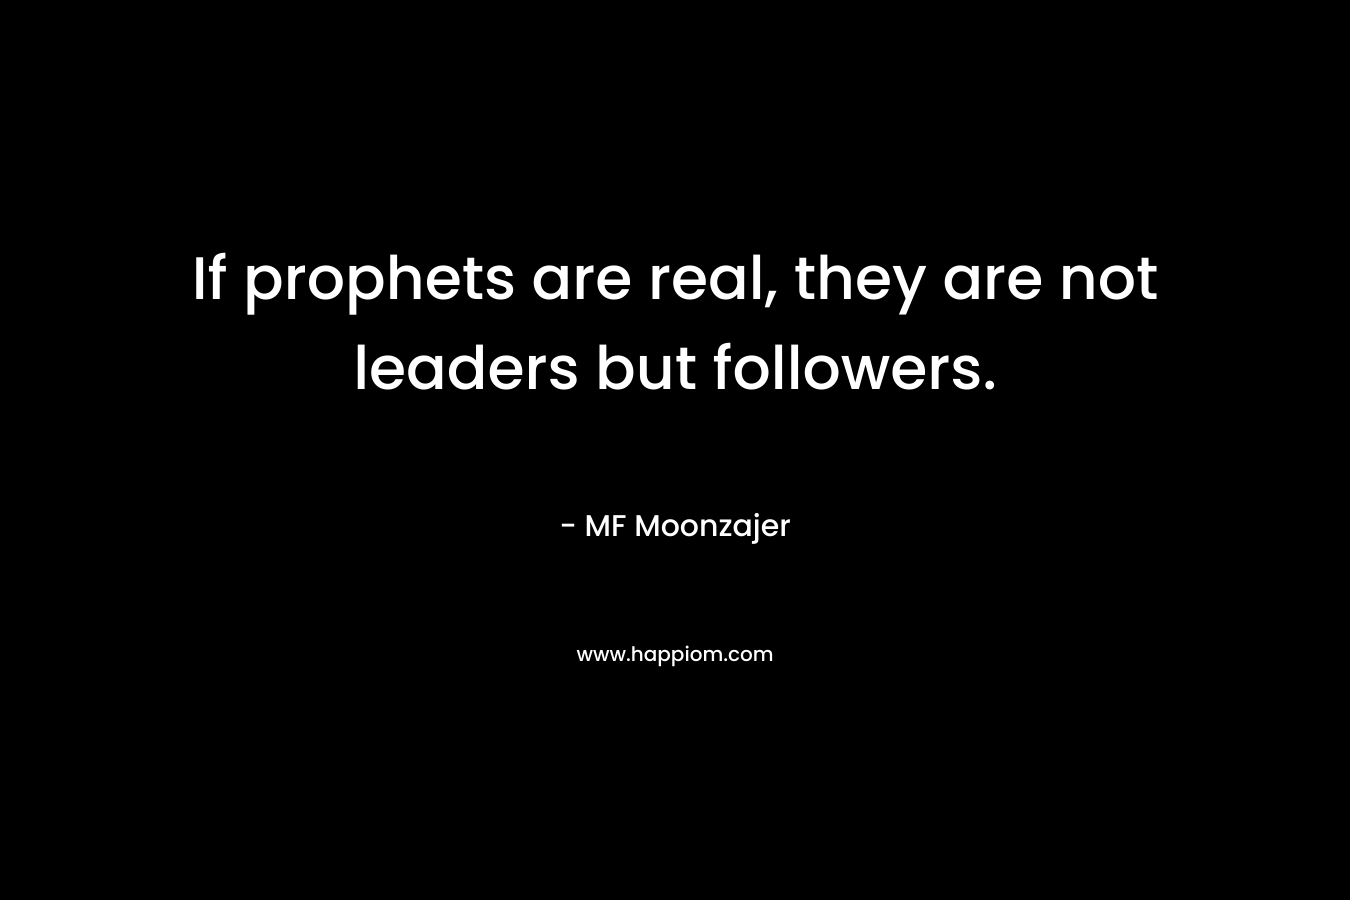 If prophets are real, they are not leaders but followers. – MF Moonzajer